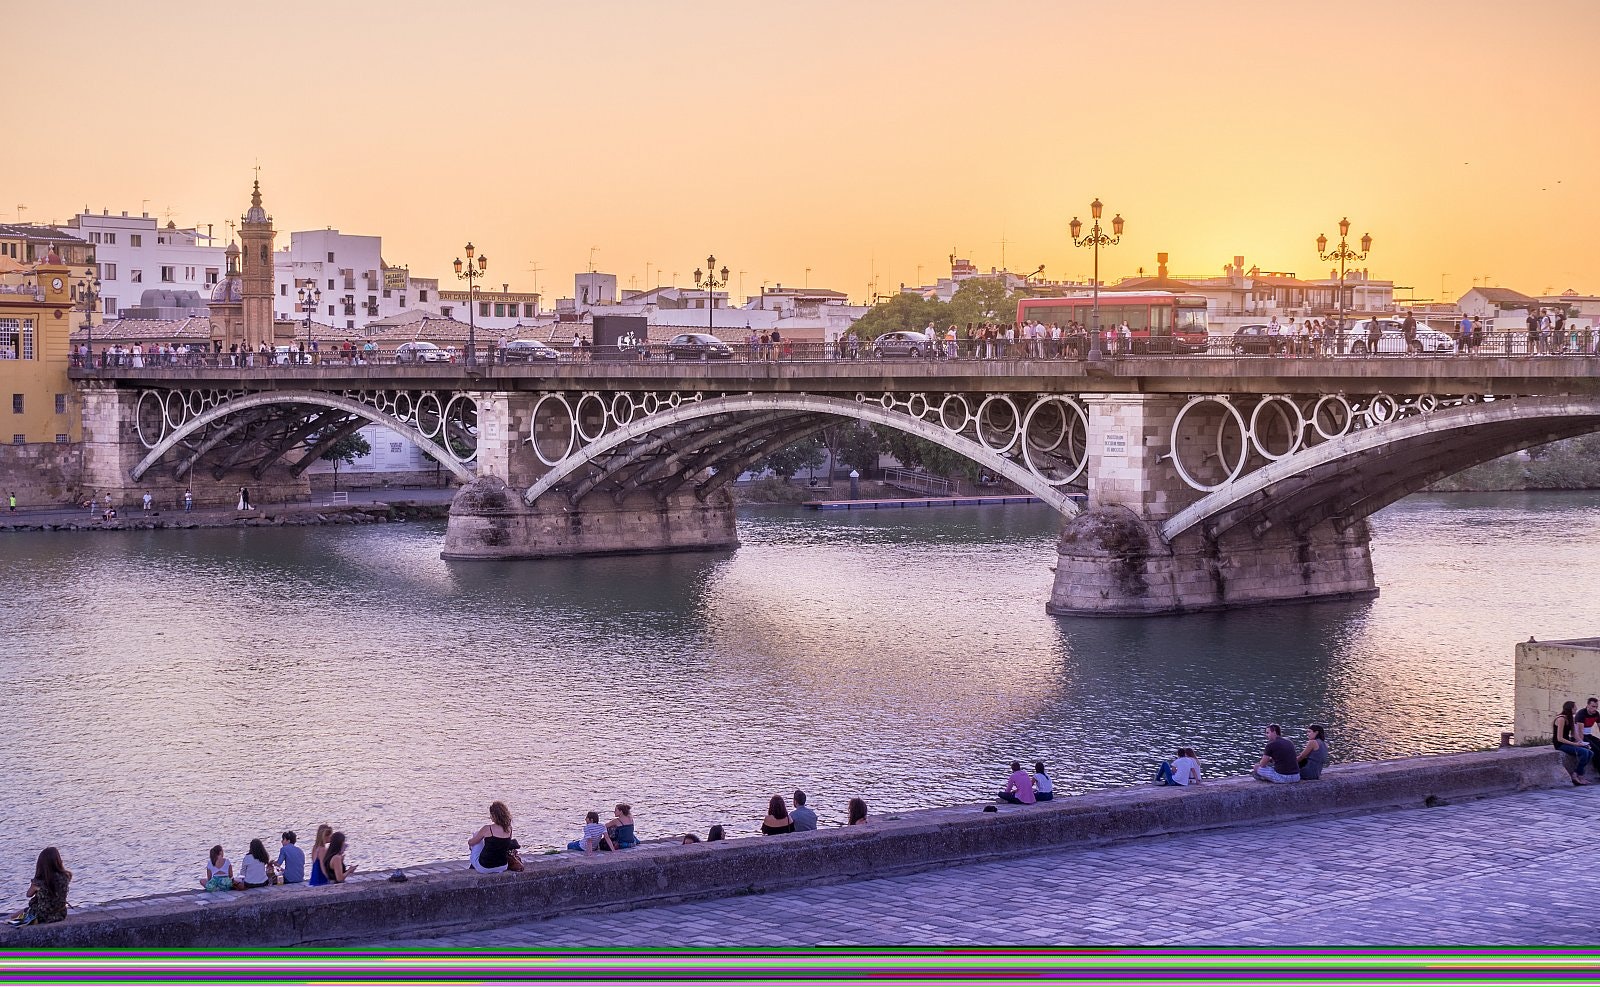 A stone arch bridge across a river at sunset, with buildings beyond and people sitting at the riverside.